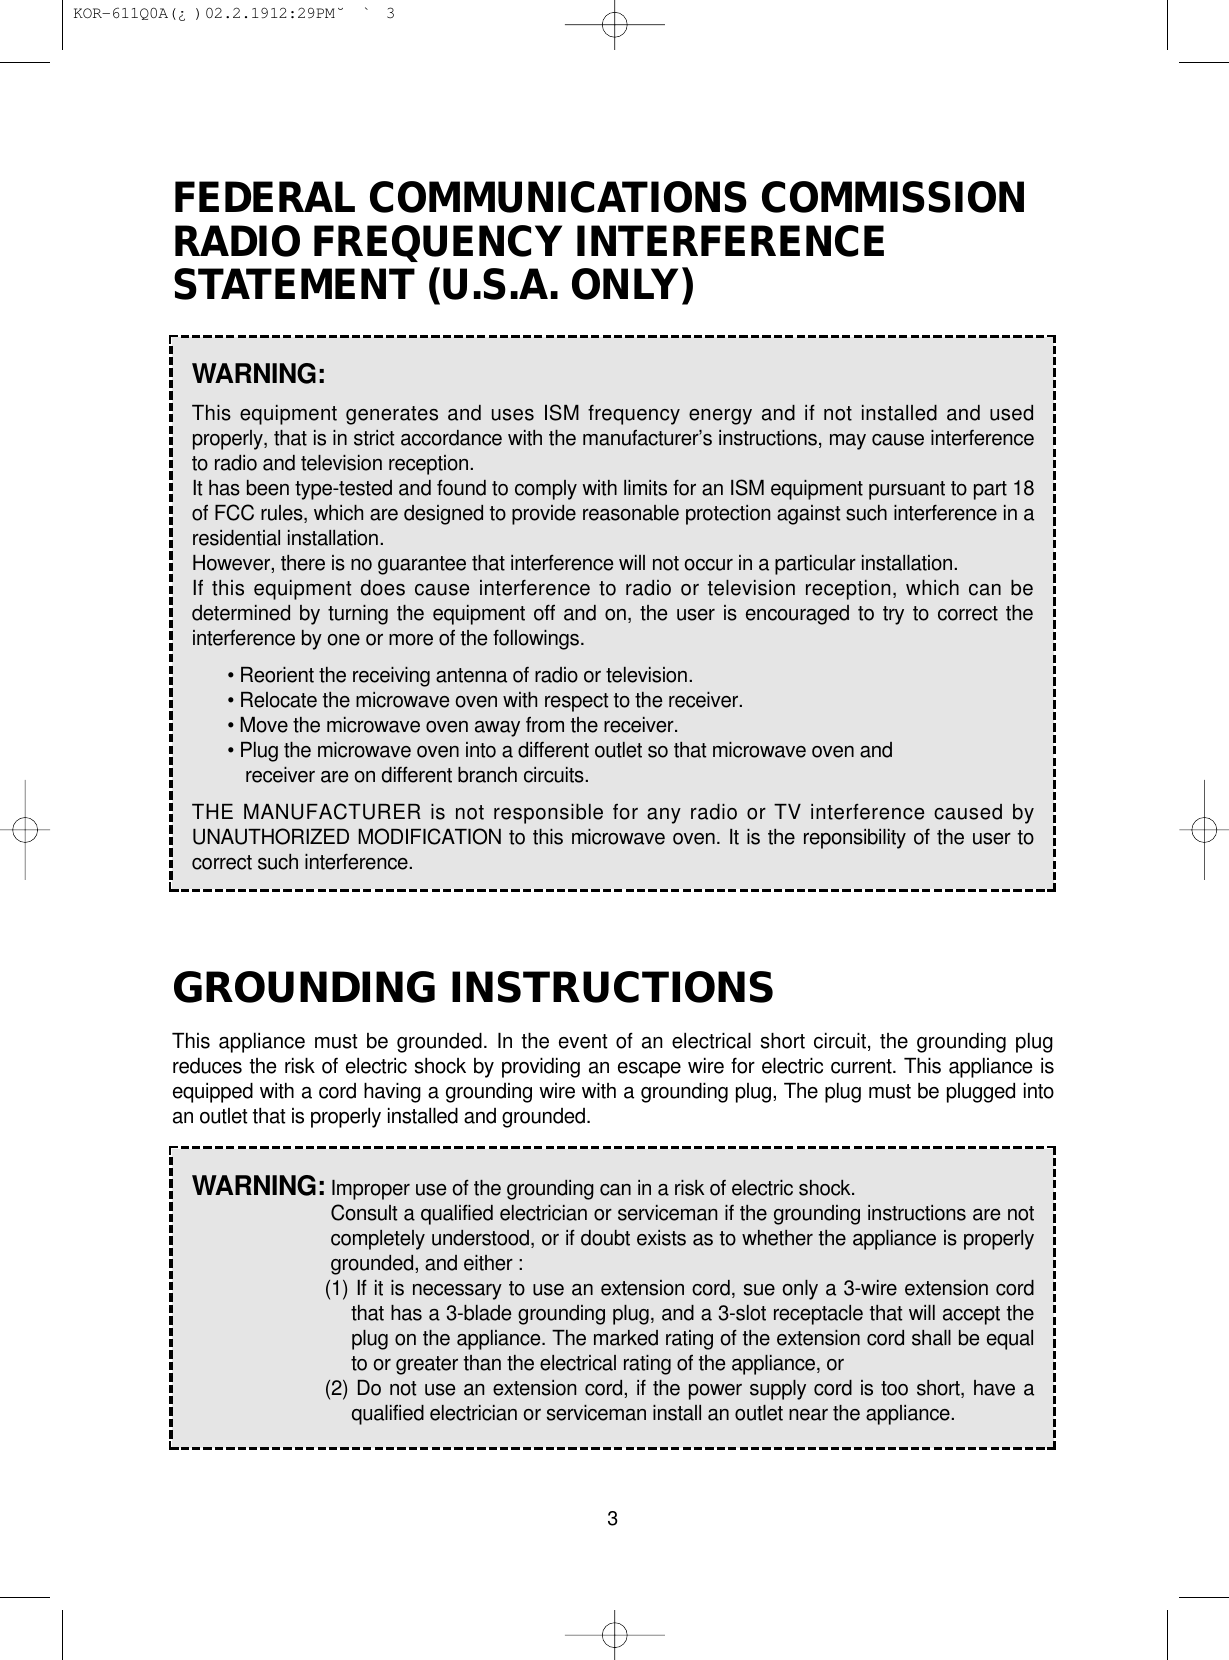 3FEDERAL COMMUNICATIONS COMMISSIONRADIO FREQUENCY INTERFERENCESTATEMENT (U.S.A. ONLY)GROUNDING INSTRUCTIONSThis appliance must be grounded. In the event of an electrical short circuit, the grounding plugreduces the risk of electric shock by providing an escape wire for electric current. This appliance isequipped with a cord having a grounding wire with a grounding plug, The plug must be plugged intoan outlet that is properly installed and grounded.WARNING:This equipment generates and uses ISM frequency energy and if not installed and usedproperly, that is in strict accordance with the manufacturer’s instructions, may cause interferenceto radio and television reception.It has been type-tested and found to comply with limits for an ISM equipment pursuant to part 18of FCC rules, which are designed to provide reasonable protection against such interference in aresidential installation.However, there is no guarantee that interference will not occur in a particular installation.If this equipment does cause interference to radio or television reception, which can bedetermined by turning the equipment off and on, the user is encouraged to try to correct theinterference by one or more of the followings.• Reorient the receiving antenna of radio or television.• Relocate the microwave oven with respect to the receiver.• Move the microwave oven away from the receiver.• Plug the microwave oven into a different outlet so that microwave oven andreceiver are on different branch circuits.THE MANUFACTURER is not responsible for any radio or TV interference caused byUNAUTHORIZED MODIFICATION to this microwave oven. It is the reponsibility of the user tocorrect such interference.WARNING: Improper use of the grounding can in a risk of electric shock.Consult a qualified electrician or serviceman if the grounding instructions are notcompletely understood, or if doubt exists as to whether the appliance is properlygrounded, and either :(1) If it is necessary to use an extension cord, sue only a 3-wire extension cordthat has a 3-blade grounding plug, and a 3-slot receptacle that will accept theplug on the appliance. The marked rating of the extension cord shall be equalto or greater than the electrical rating of the appliance, or(2) Do not use an extension cord, if the power supply cord is too short, have aqualified electrician or serviceman install an outlet near the appliance. KOR-611Q0A(¿ )  02.2.19 12:29 PM  ˘`3